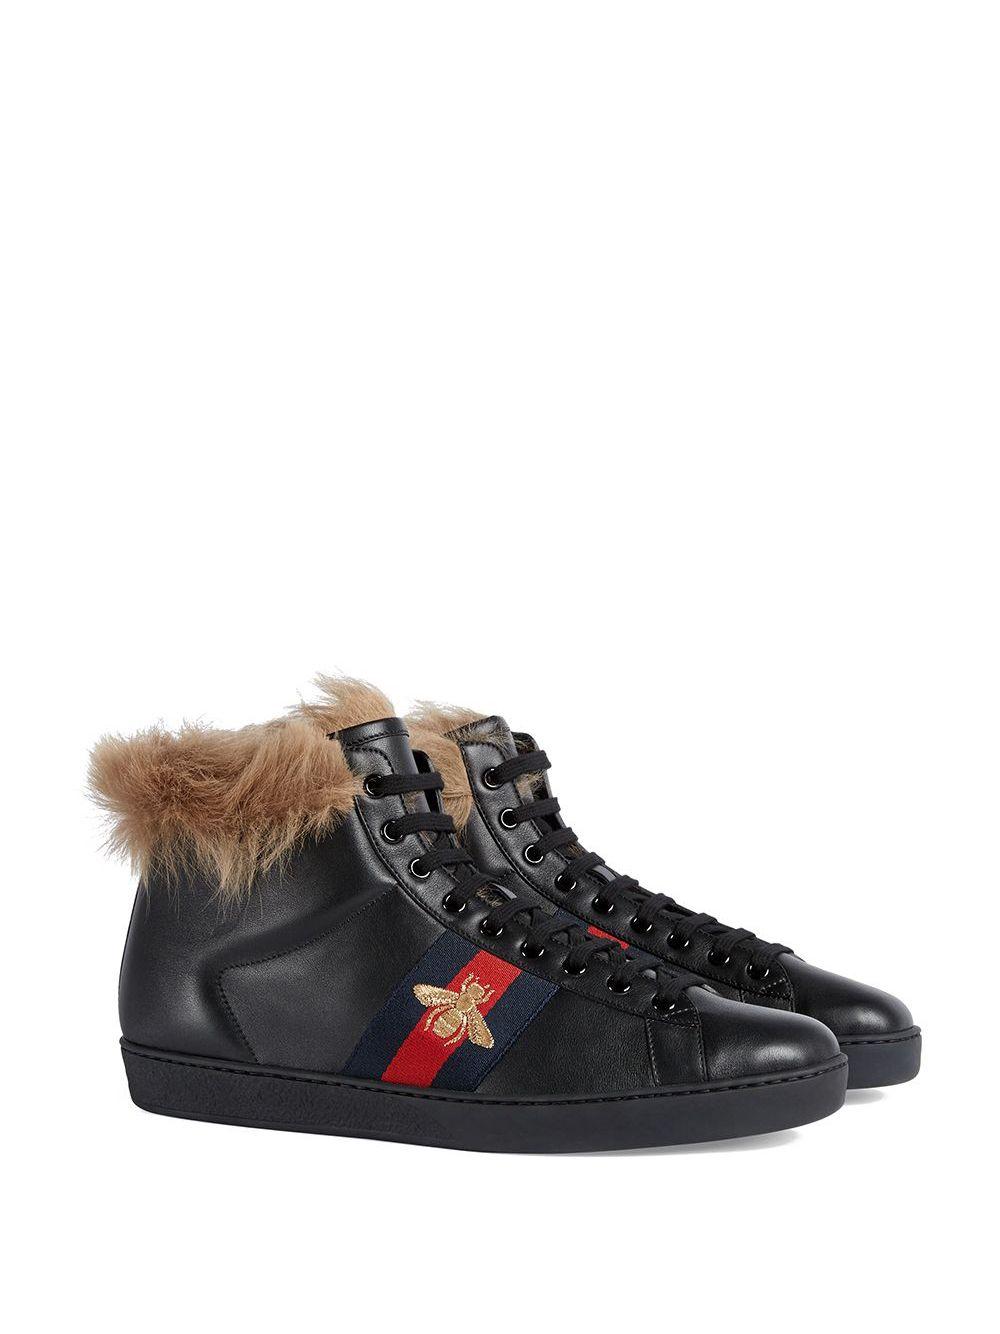 Gucci Ace High-top Sneaker With Fur in 